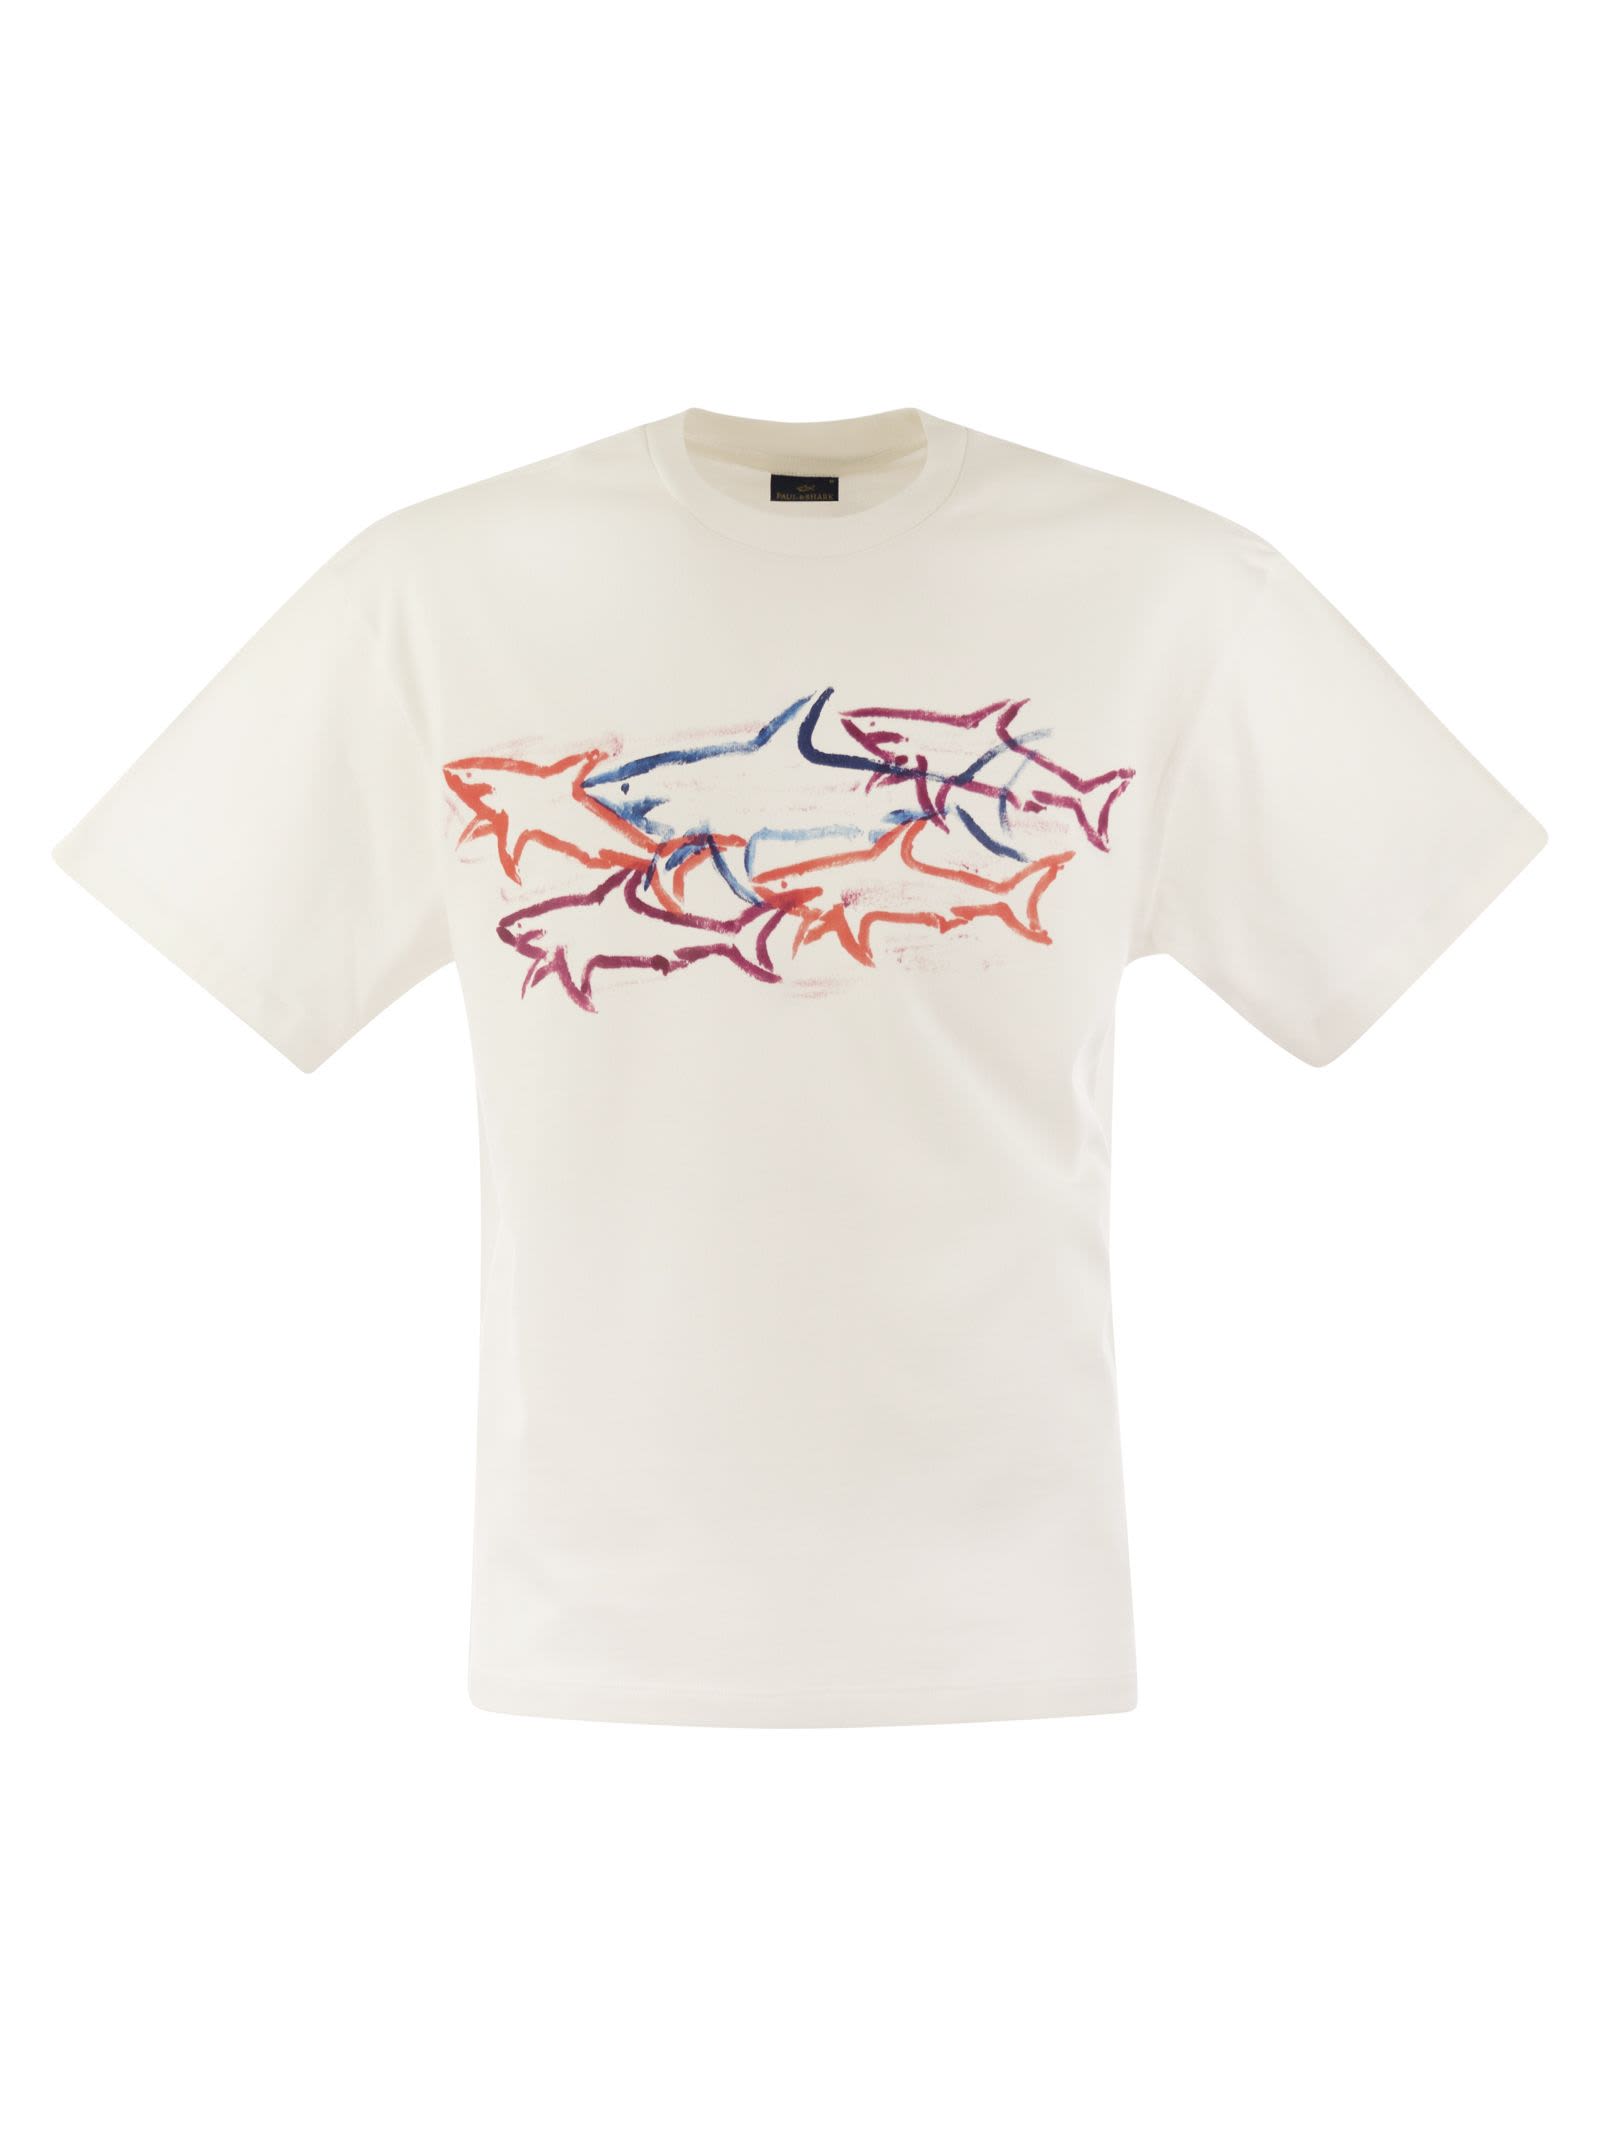 Paul&amp;shark Cotton T-shirt With Shark Print In White